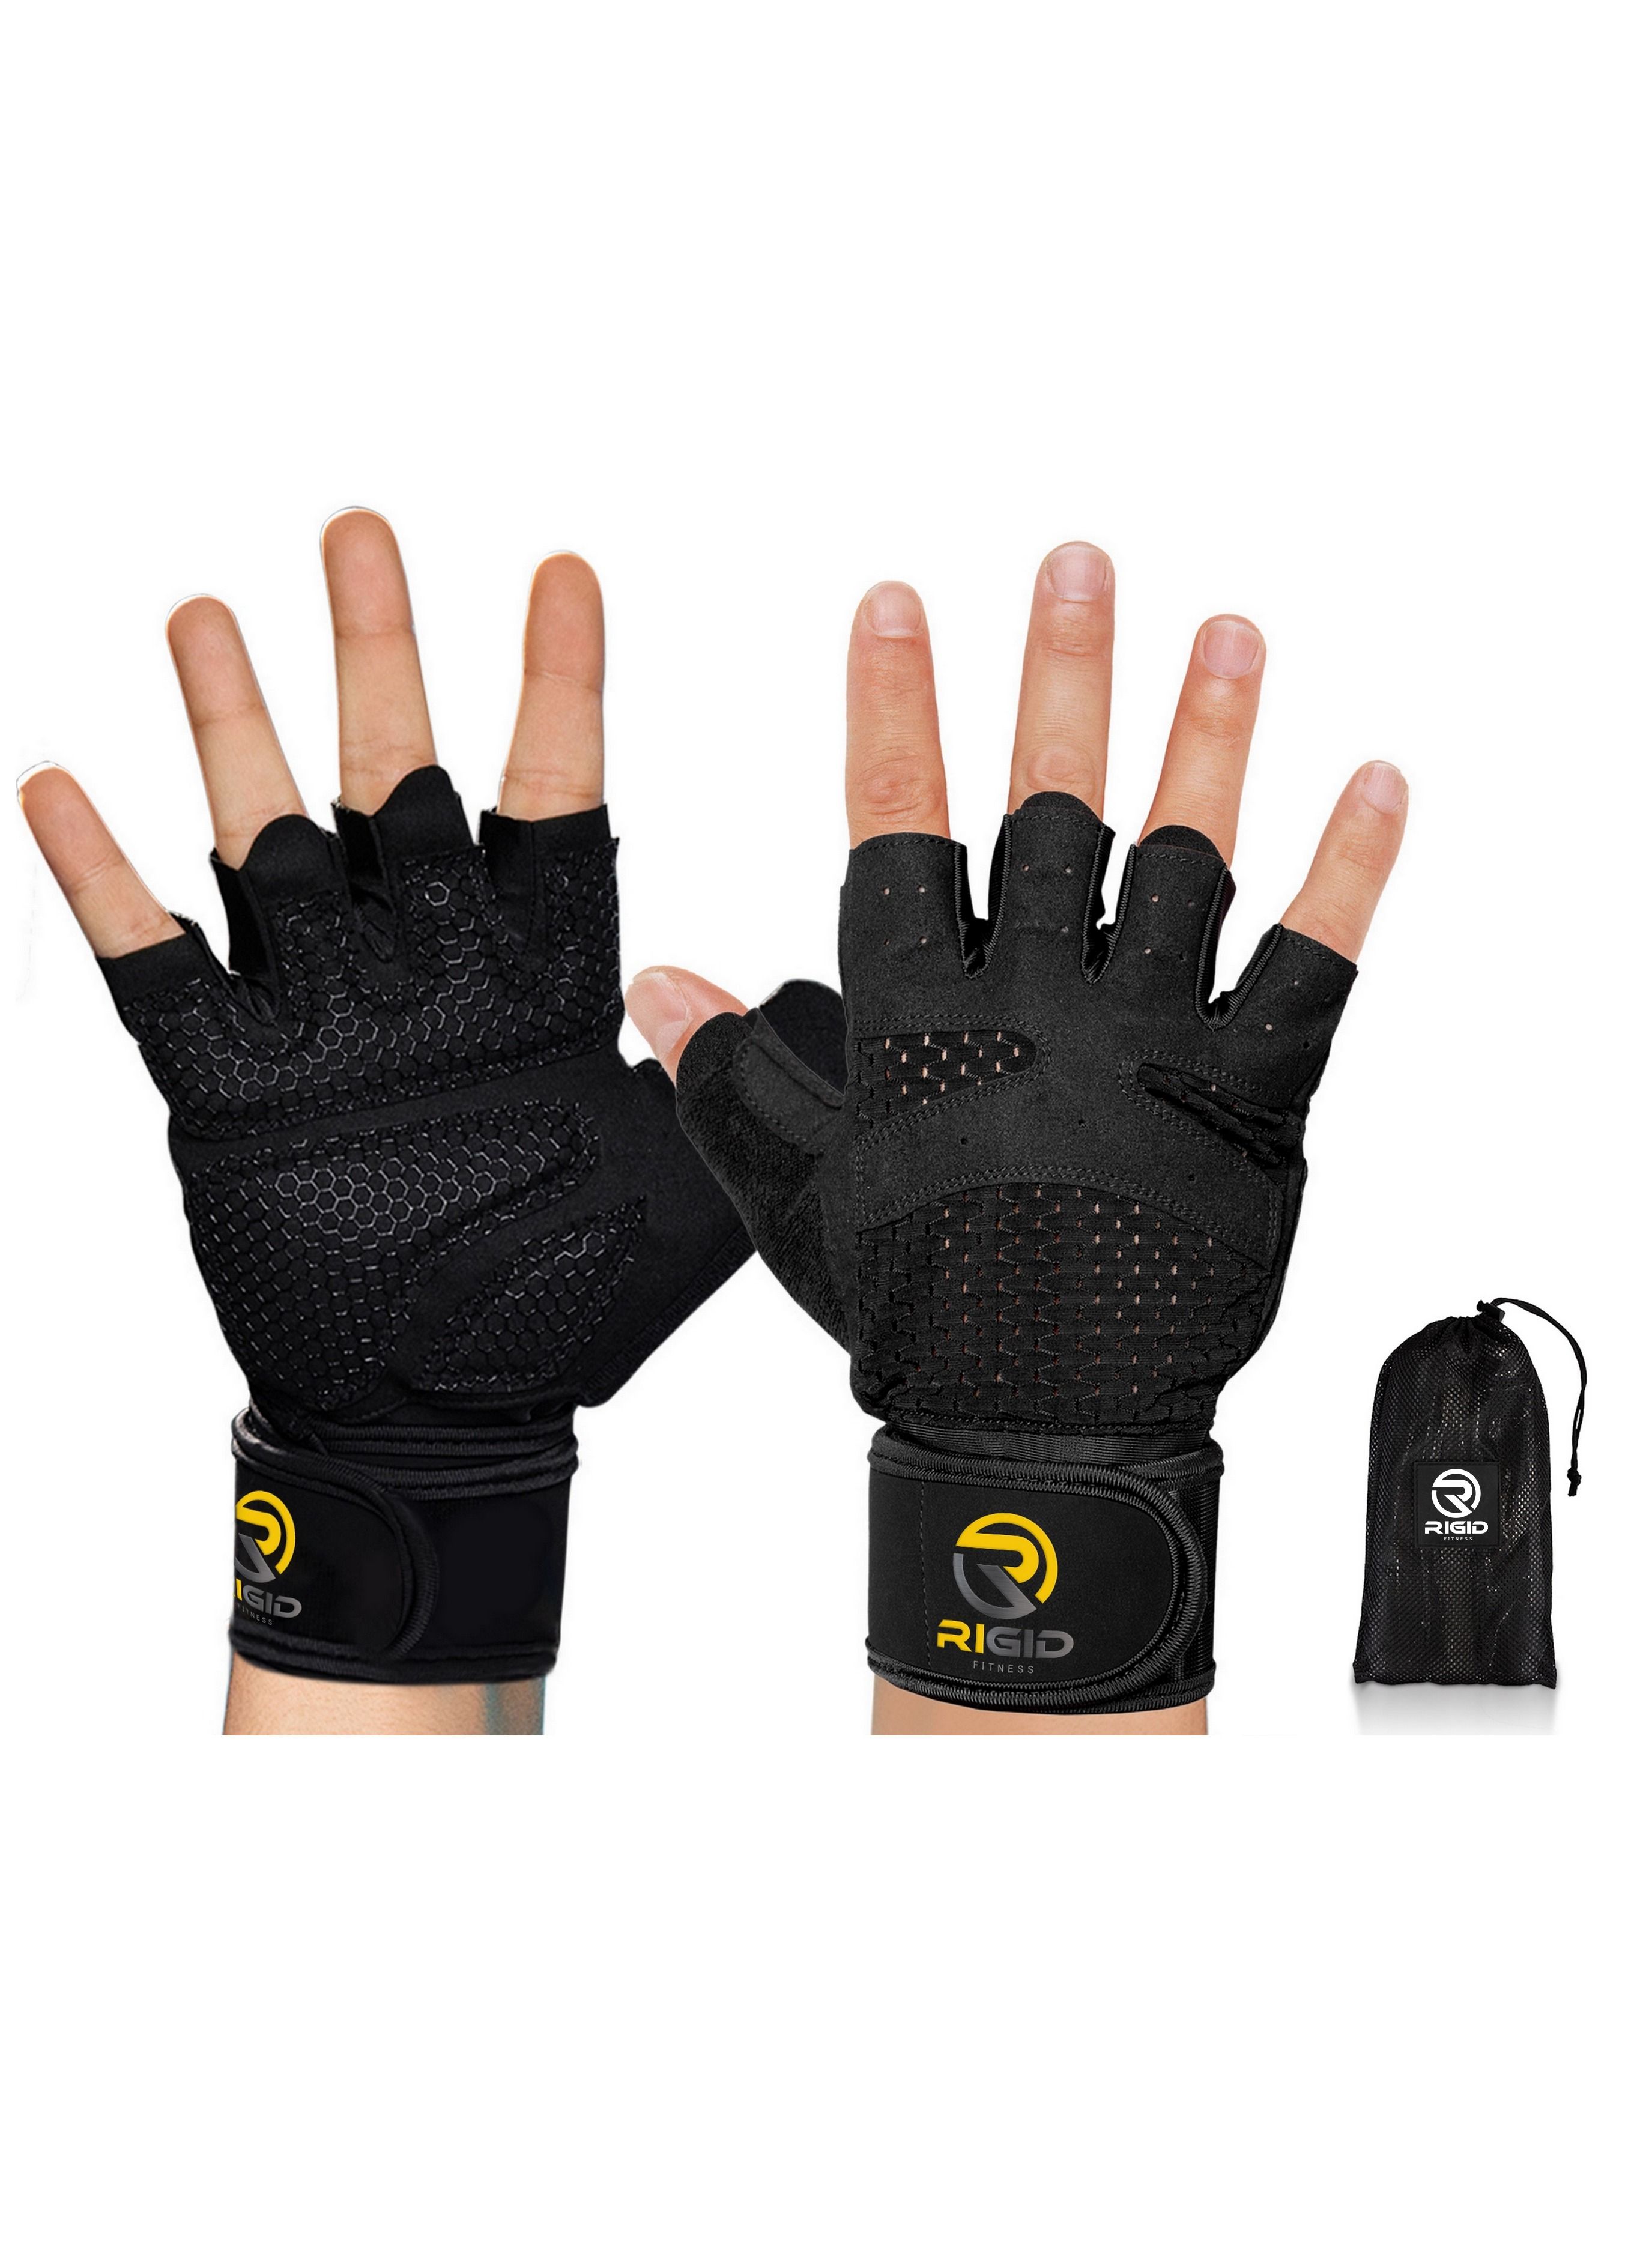 Gym Gloves Ventilated with Wrist Support Full Palm Gloves Protection for Fitness, Weightlifting, and Pull-Ups - Breathable Gloves for Men and Women - Standard Size 